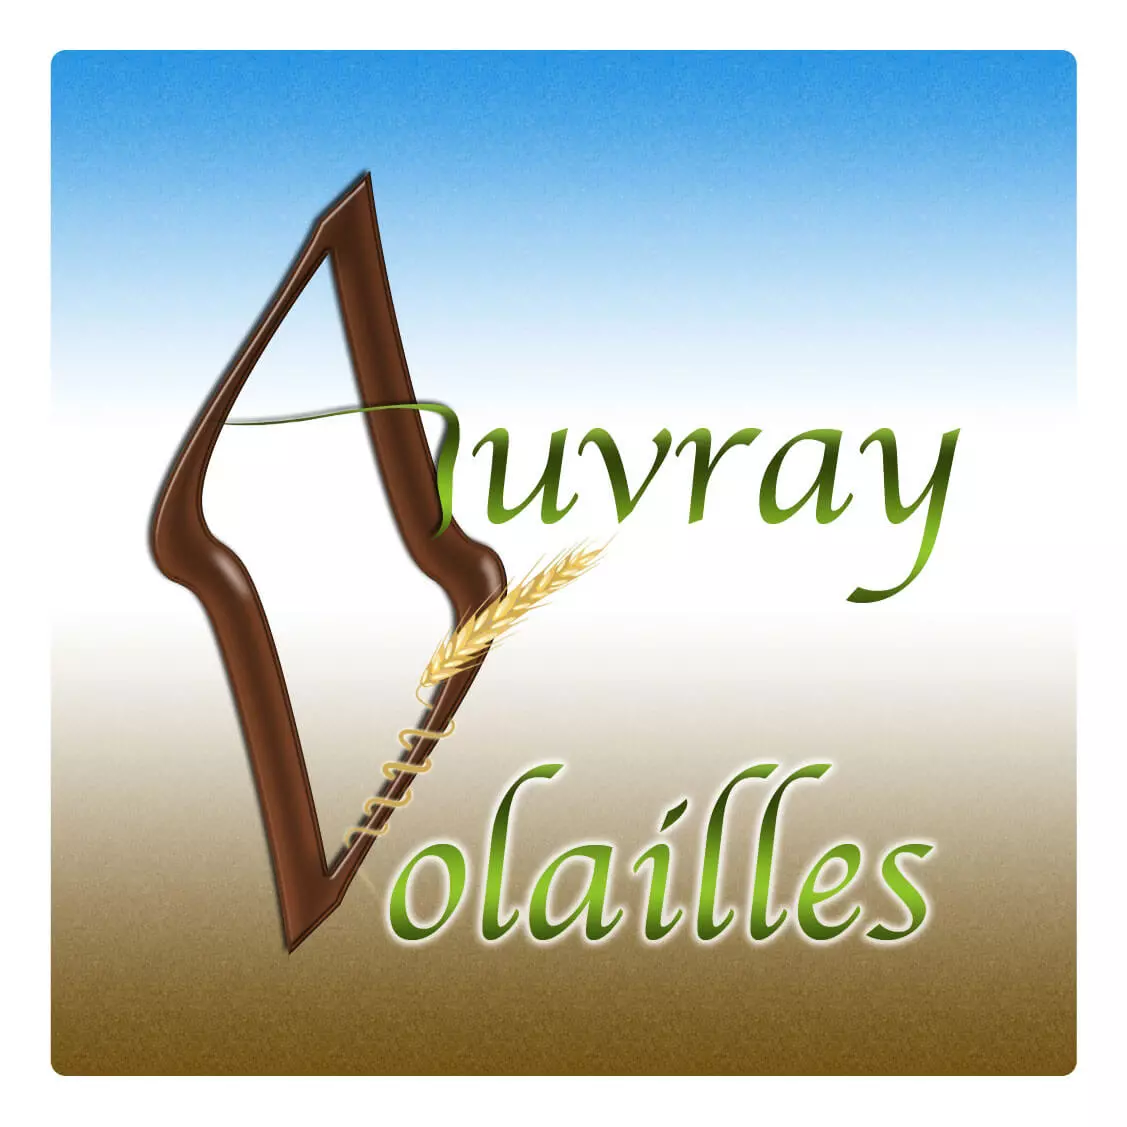 auvray_volailles